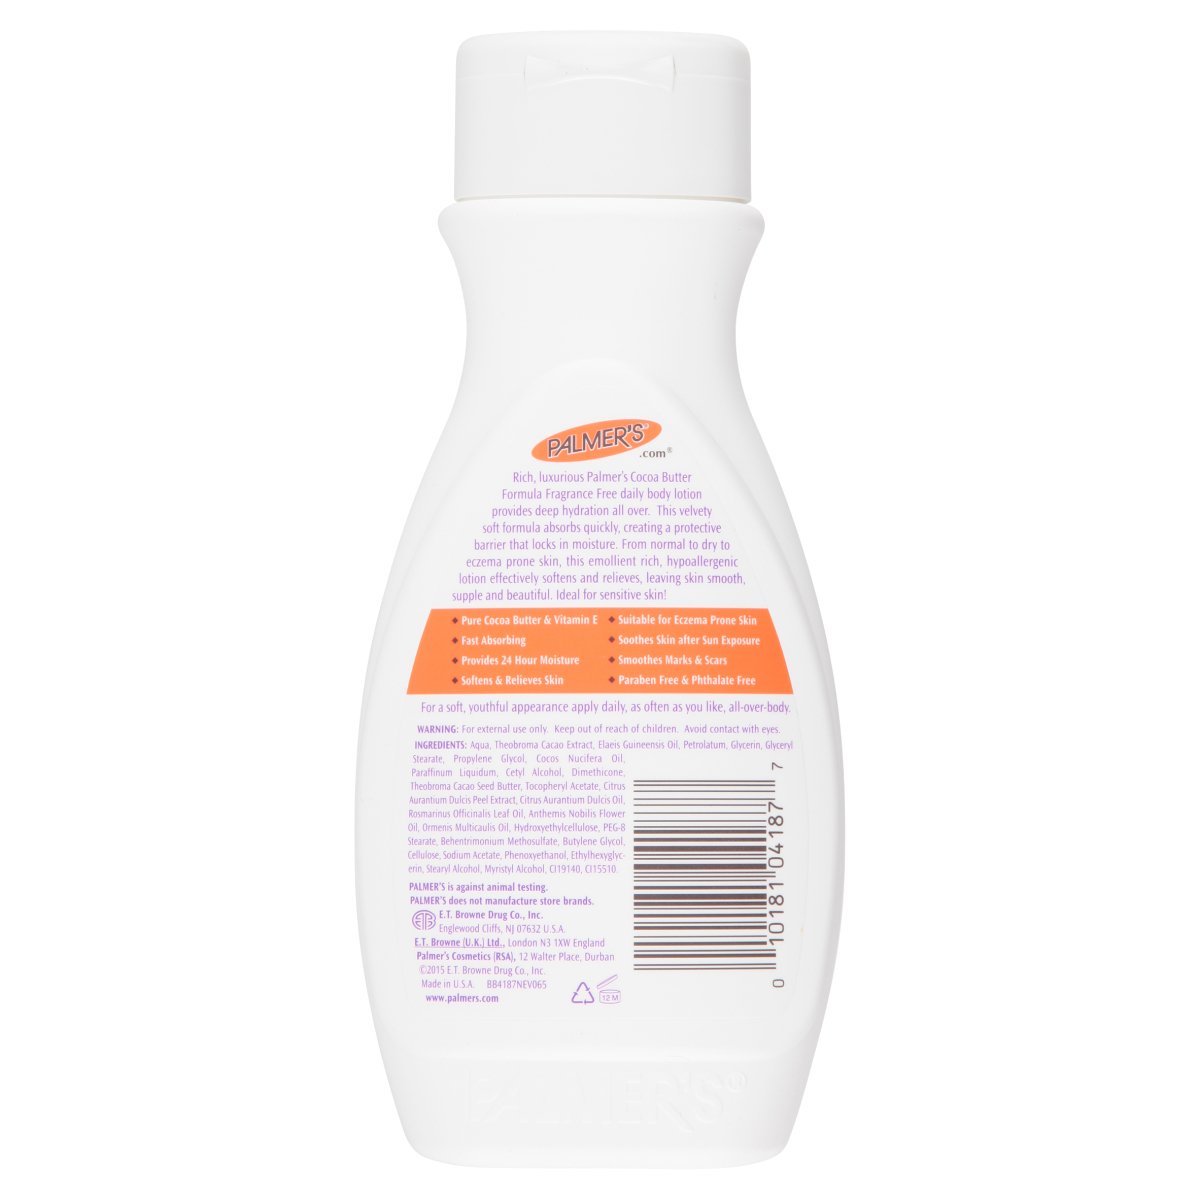 Palmers Cocoa Butter 250ml Fragrance Free - Intamarque - Wholesale 0010181041877